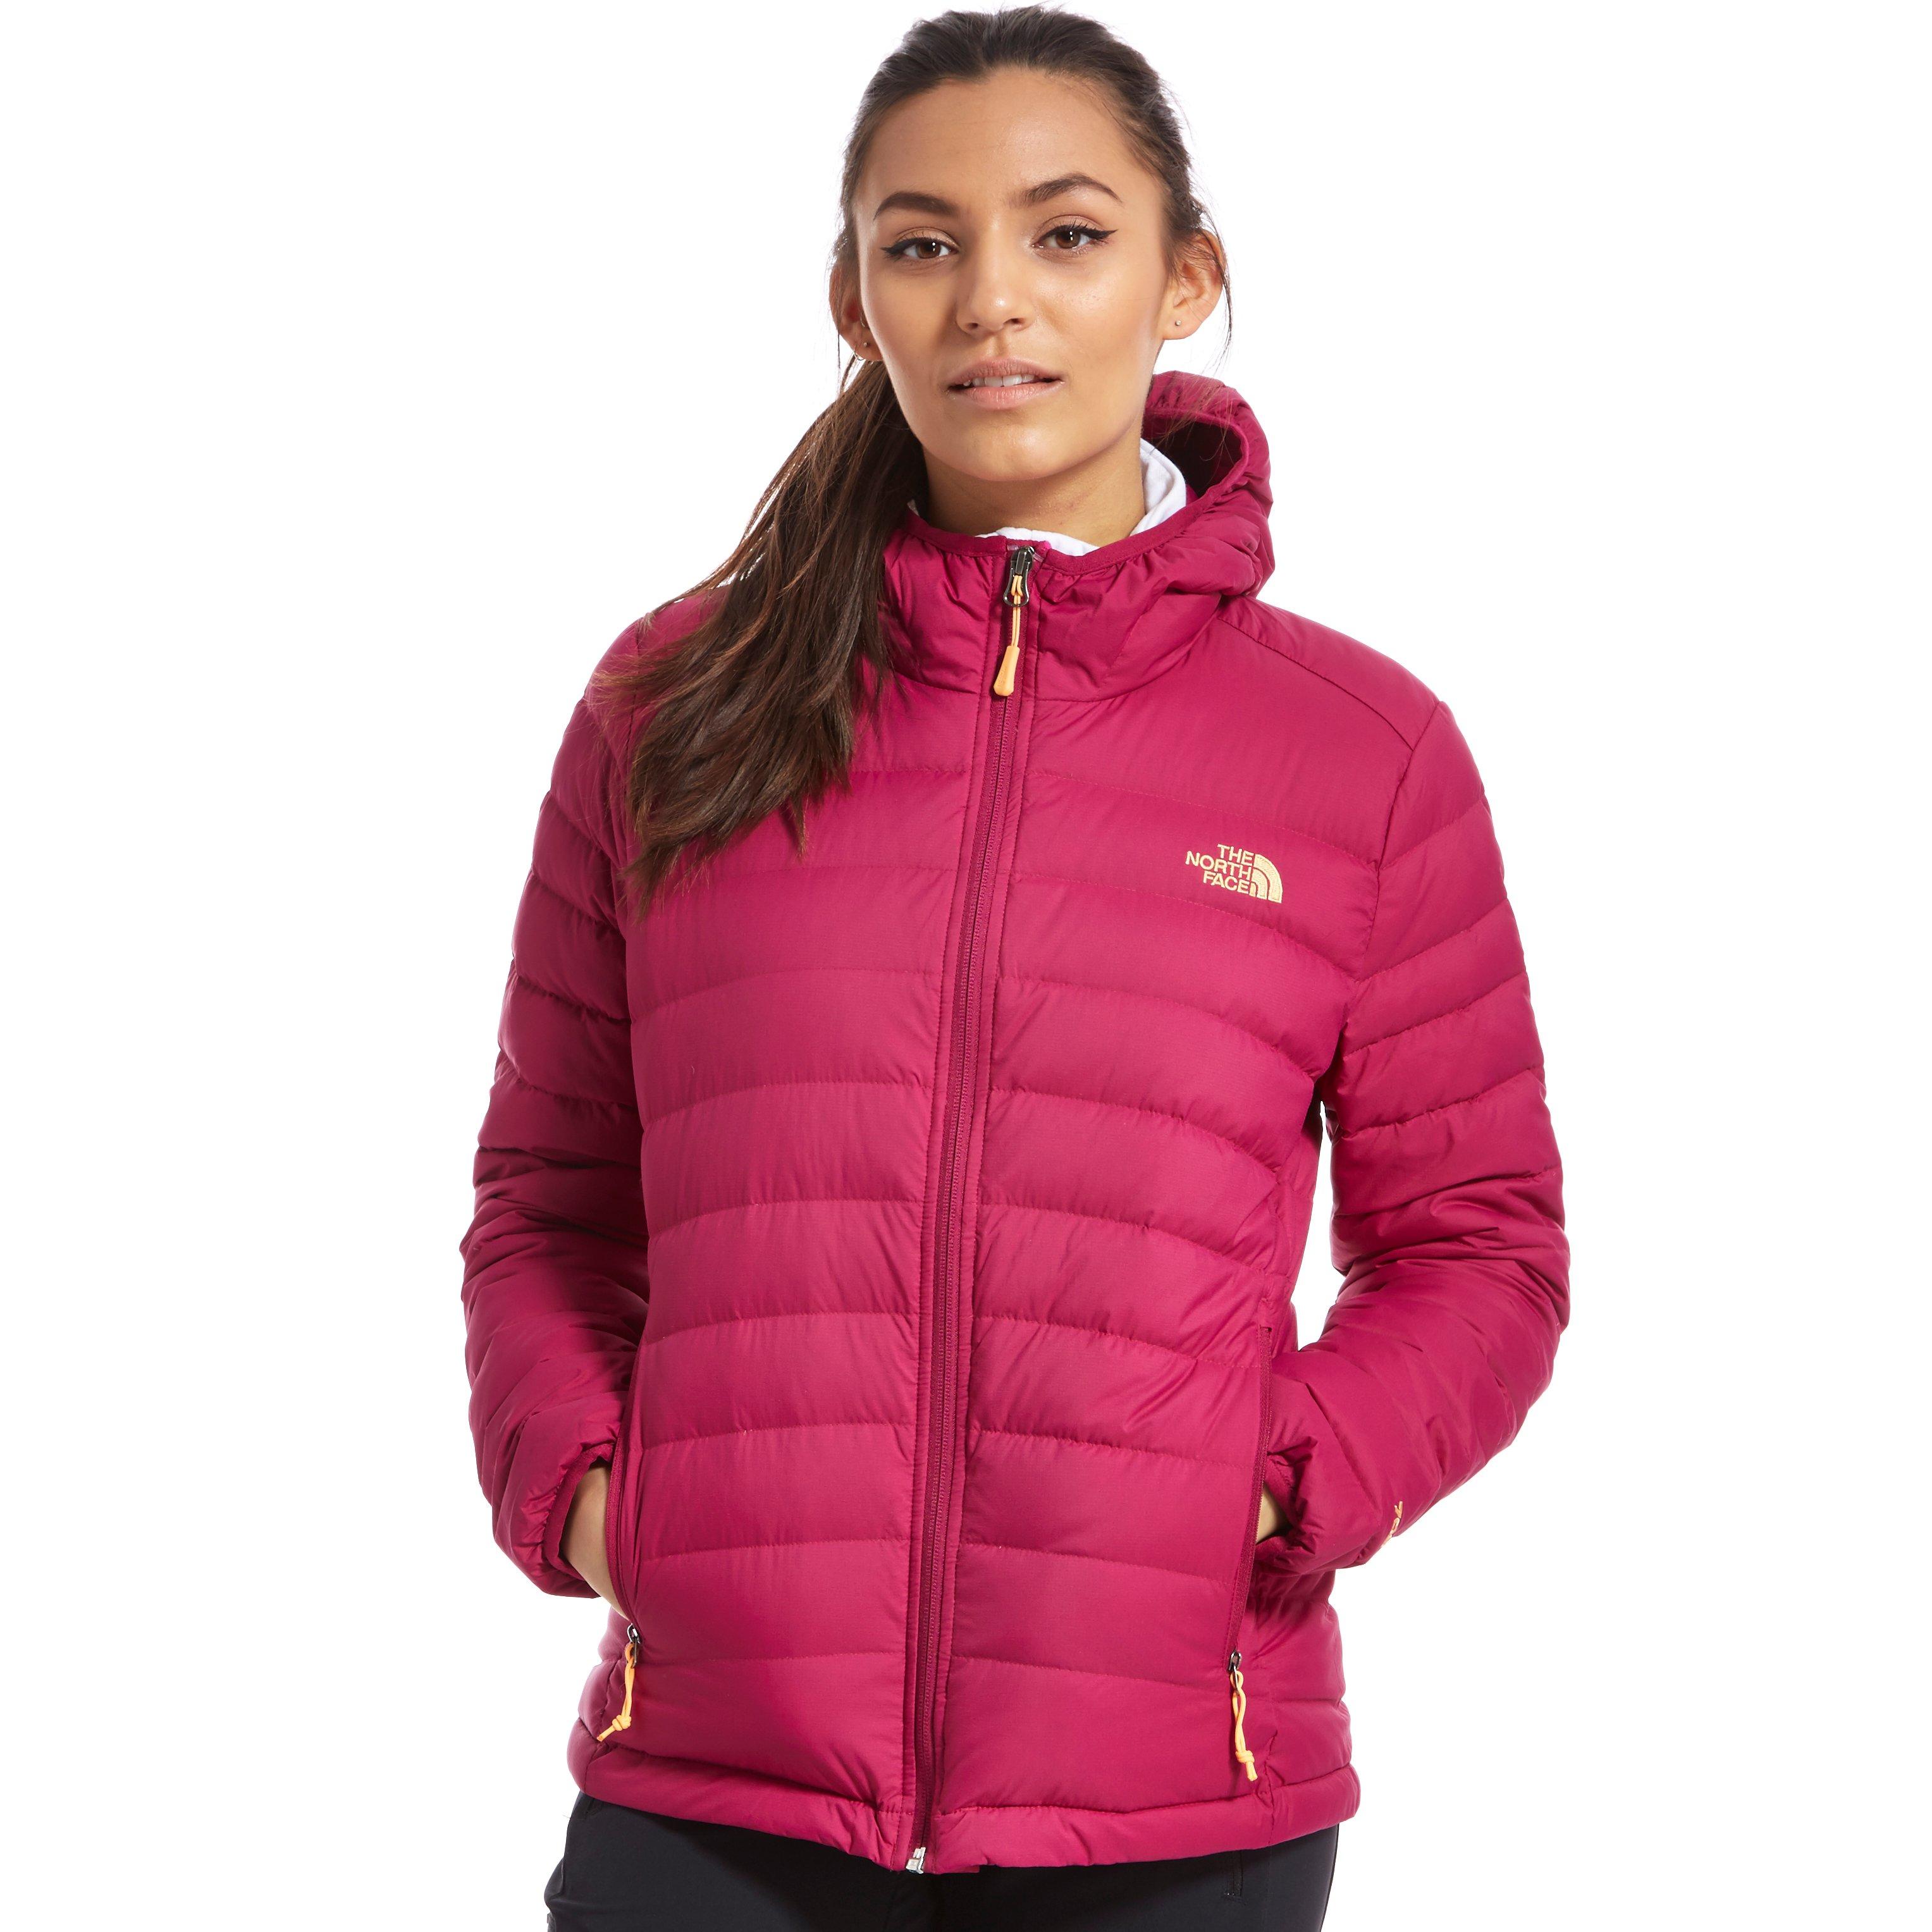 light jackets for women north face - jackets in my home